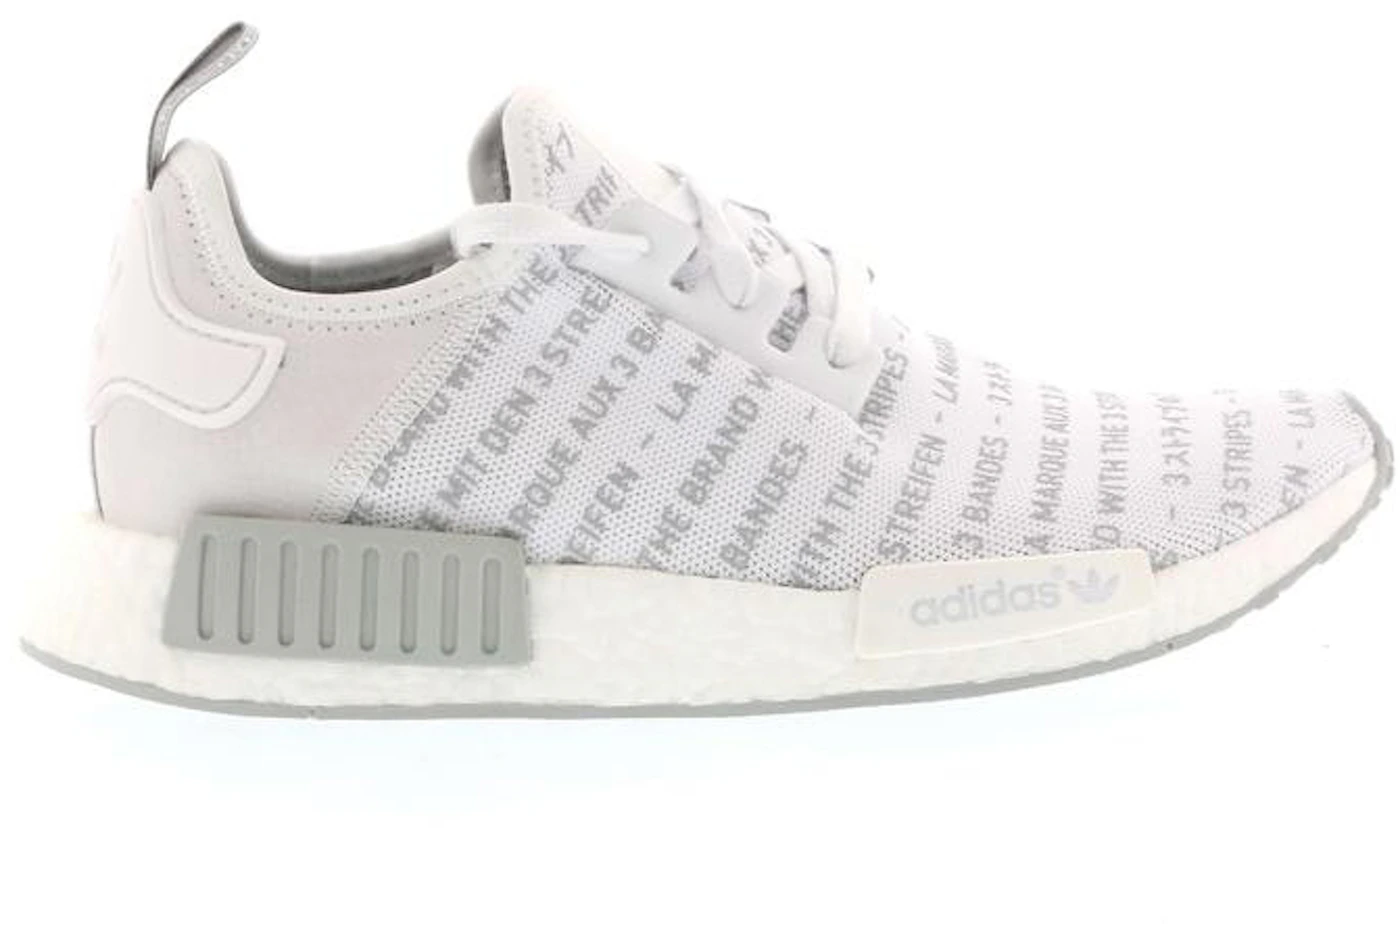 Adidas NMD R1 The Brand with the 3 Stripes S76518 White Sneakers | Men's 8